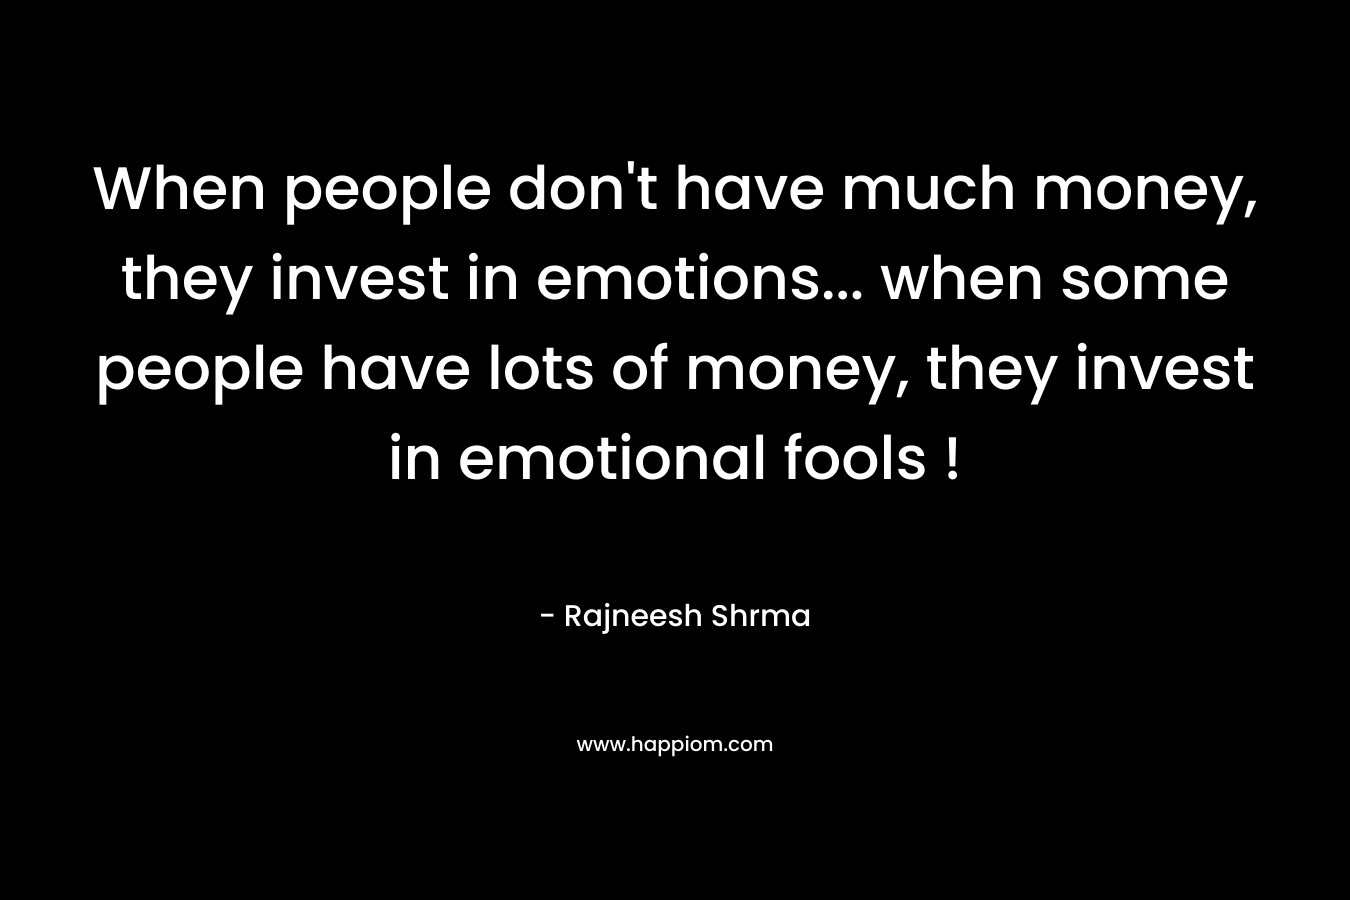 When people don’t have much money, they invest in emotions… when some people have lots of money, they invest in emotional fools ! – Rajneesh Shrma